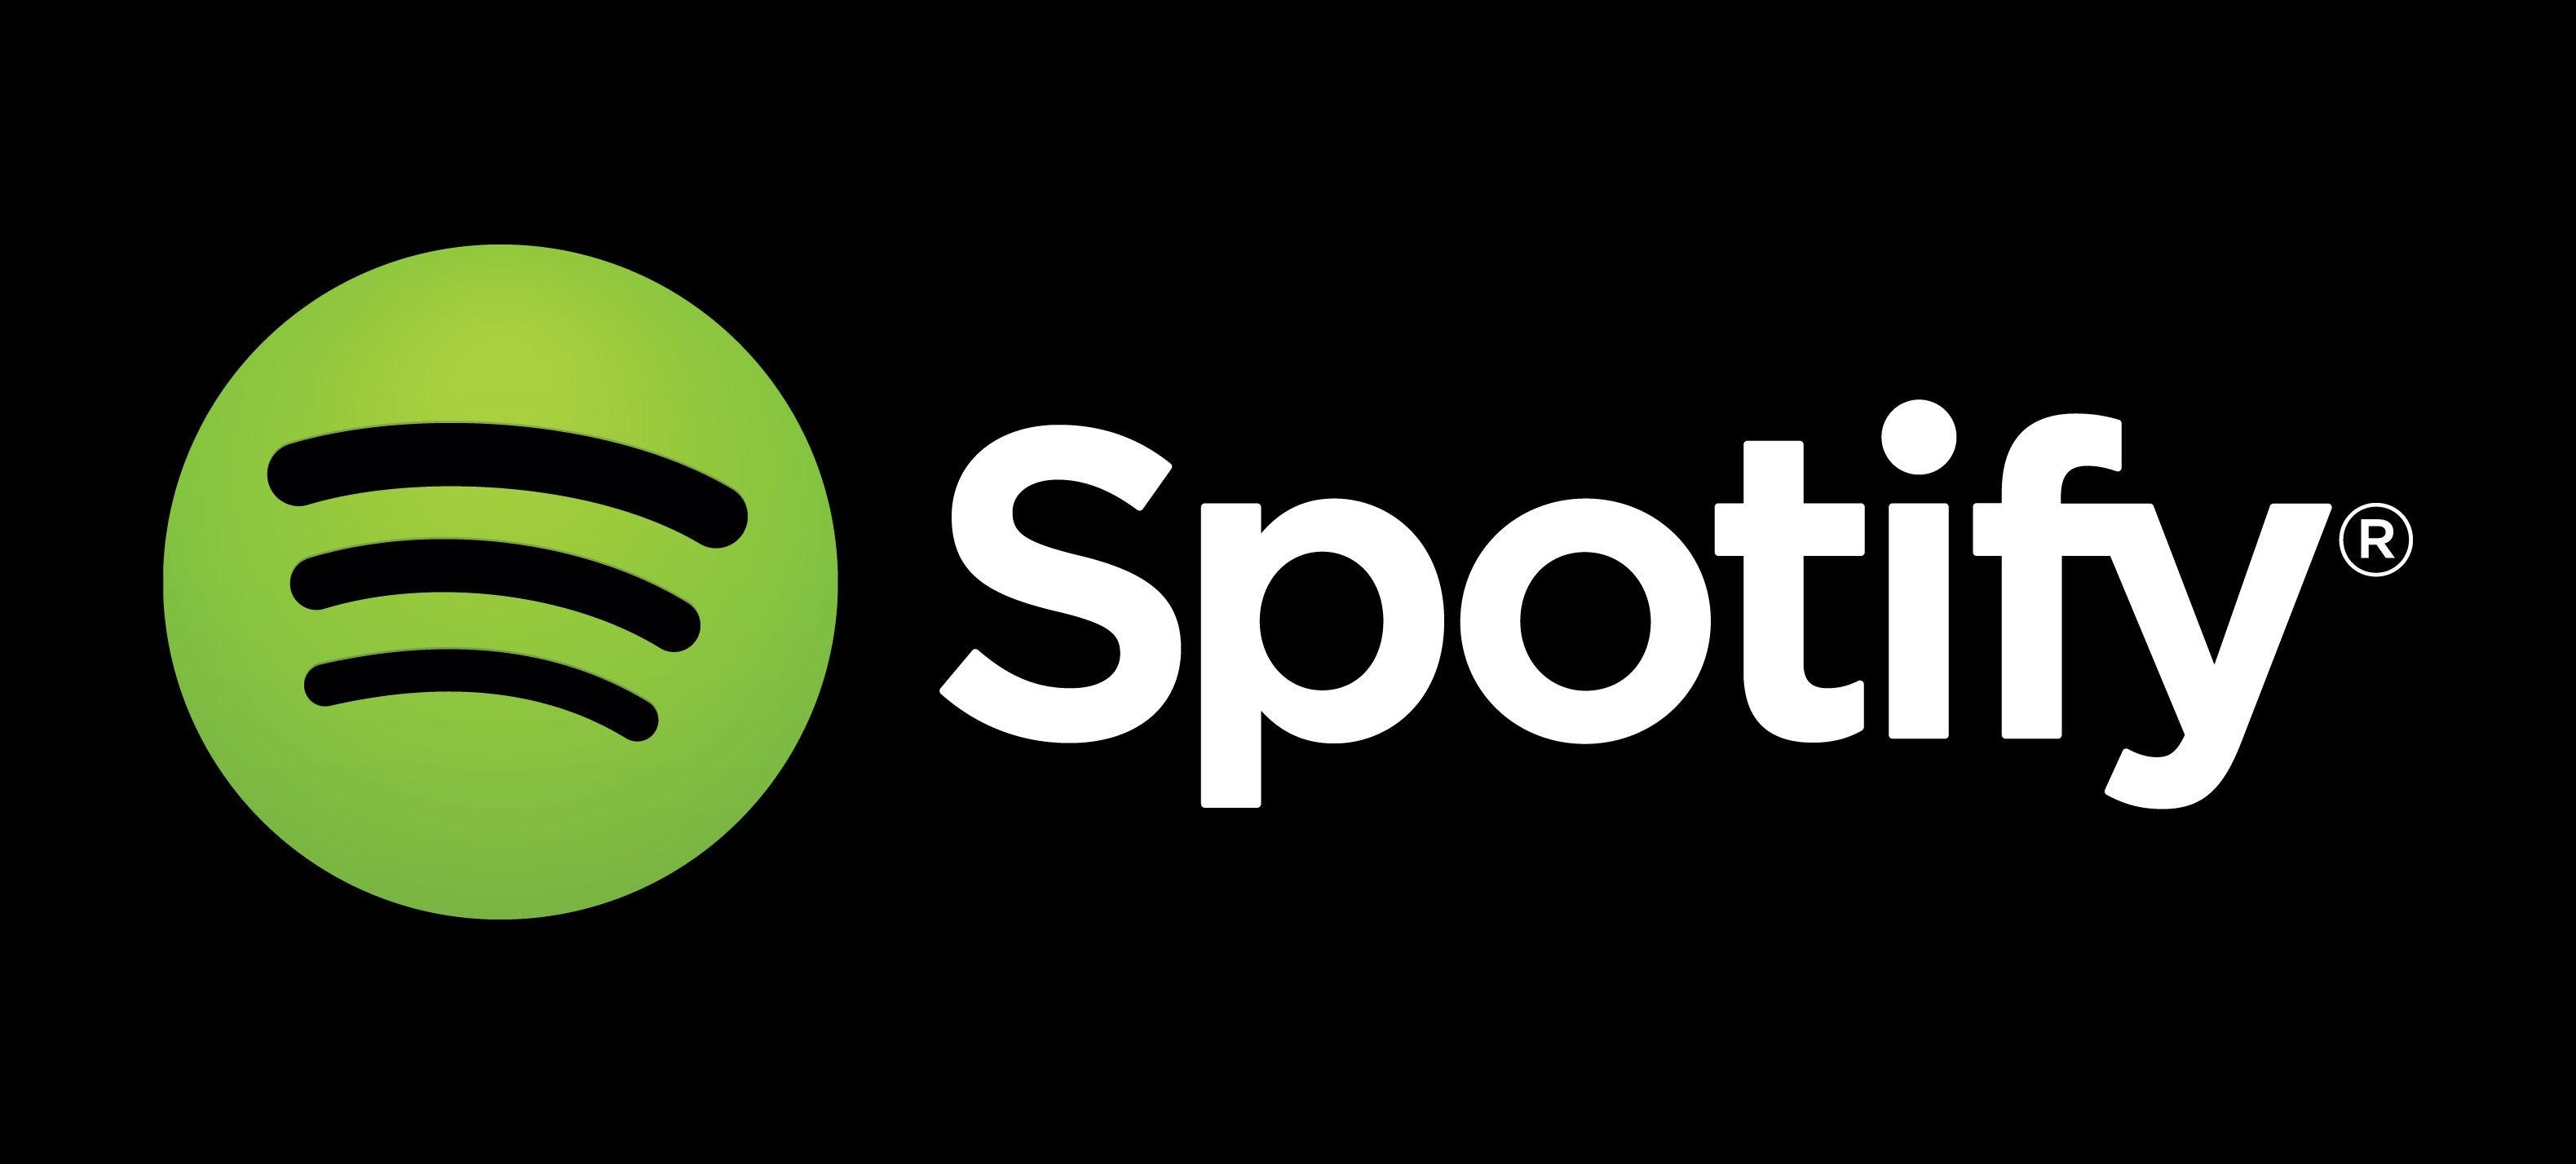 Spotify: An online music streaming service, Digital copyright restricted recorded music. 3160x1430 Dual Screen Wallpaper.